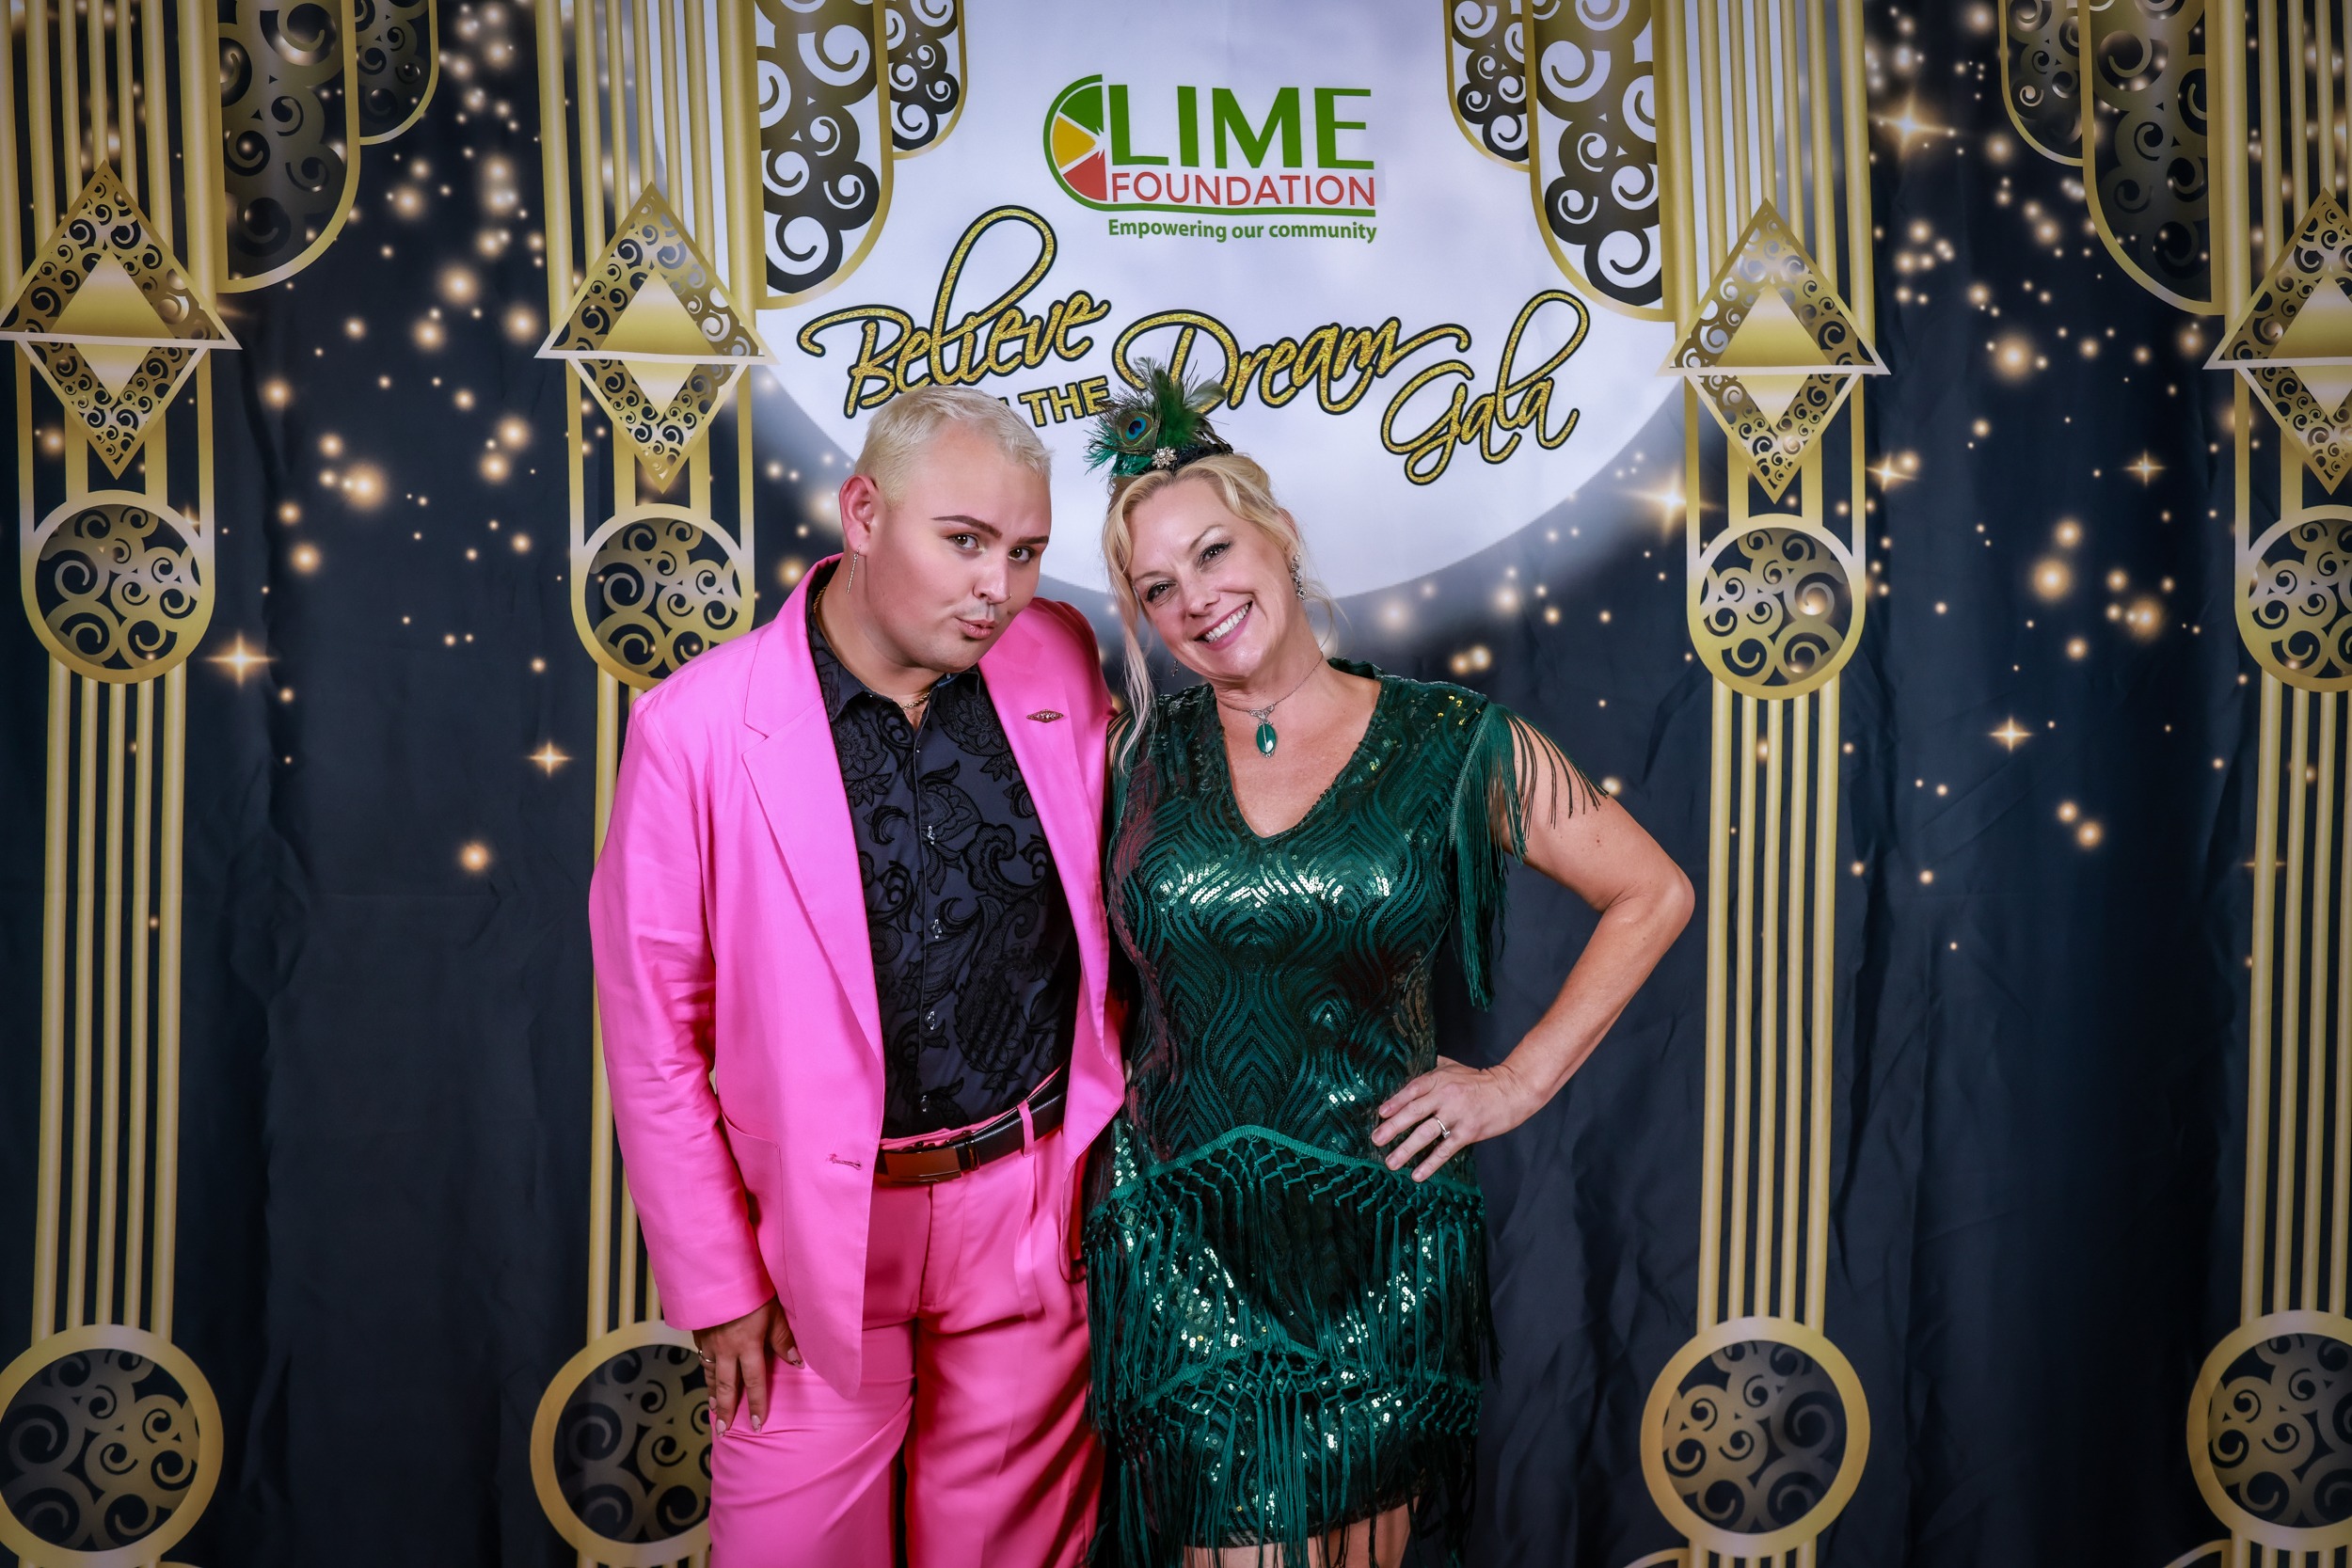 A man and woman posing for a photo in pink outfits. The LIME Foundation of Santa Rosa may have sponsored the event.